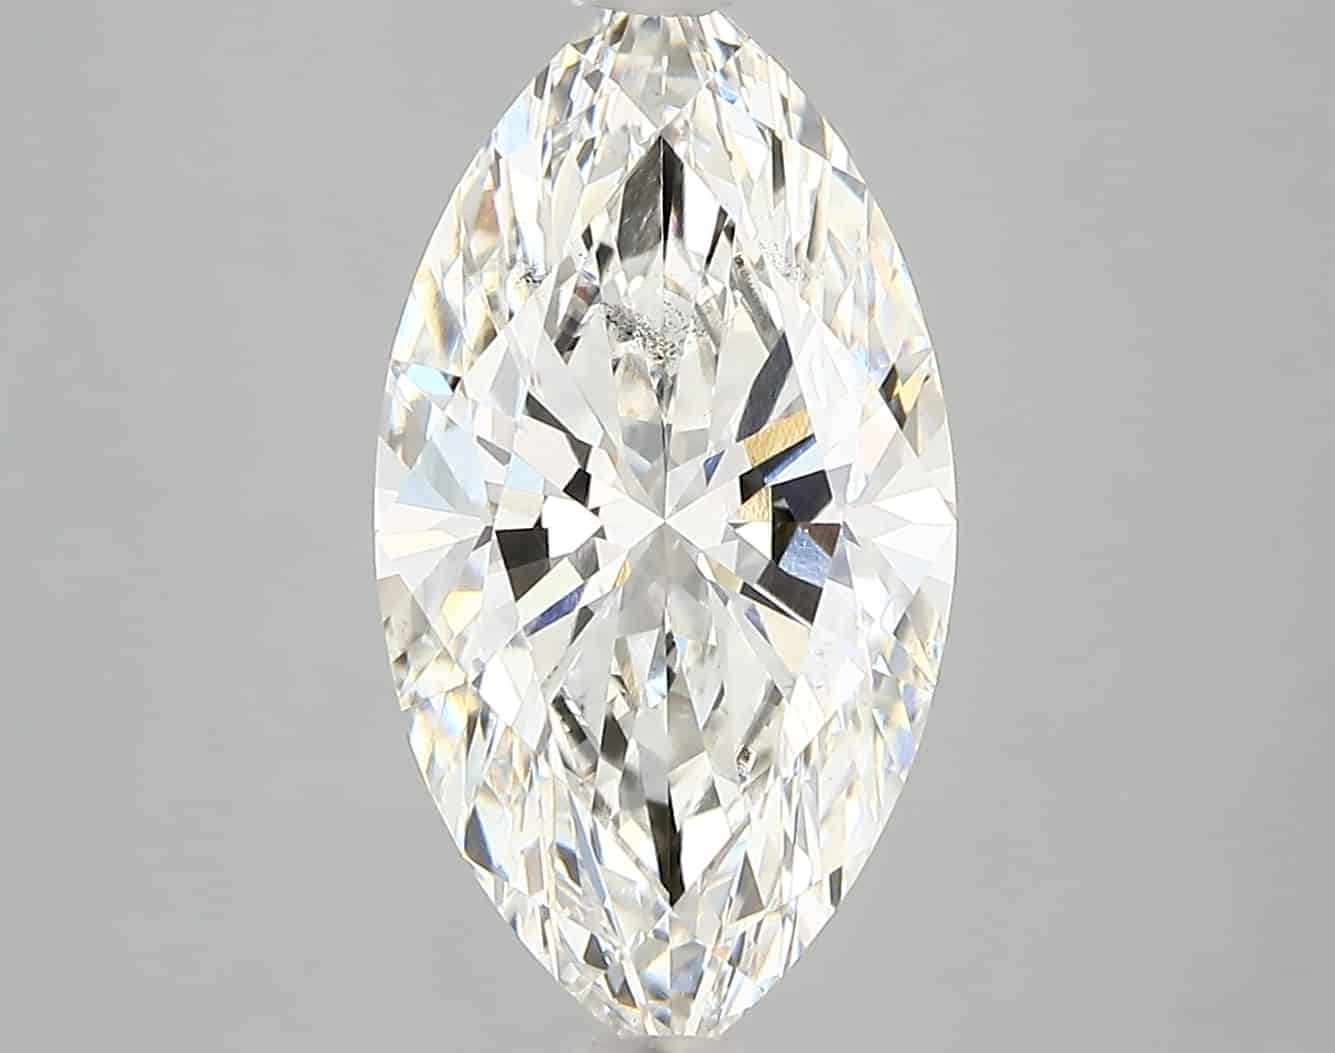 Lab Grown 3.38 Carat Diamond IGI Certified si1 clarity and H color